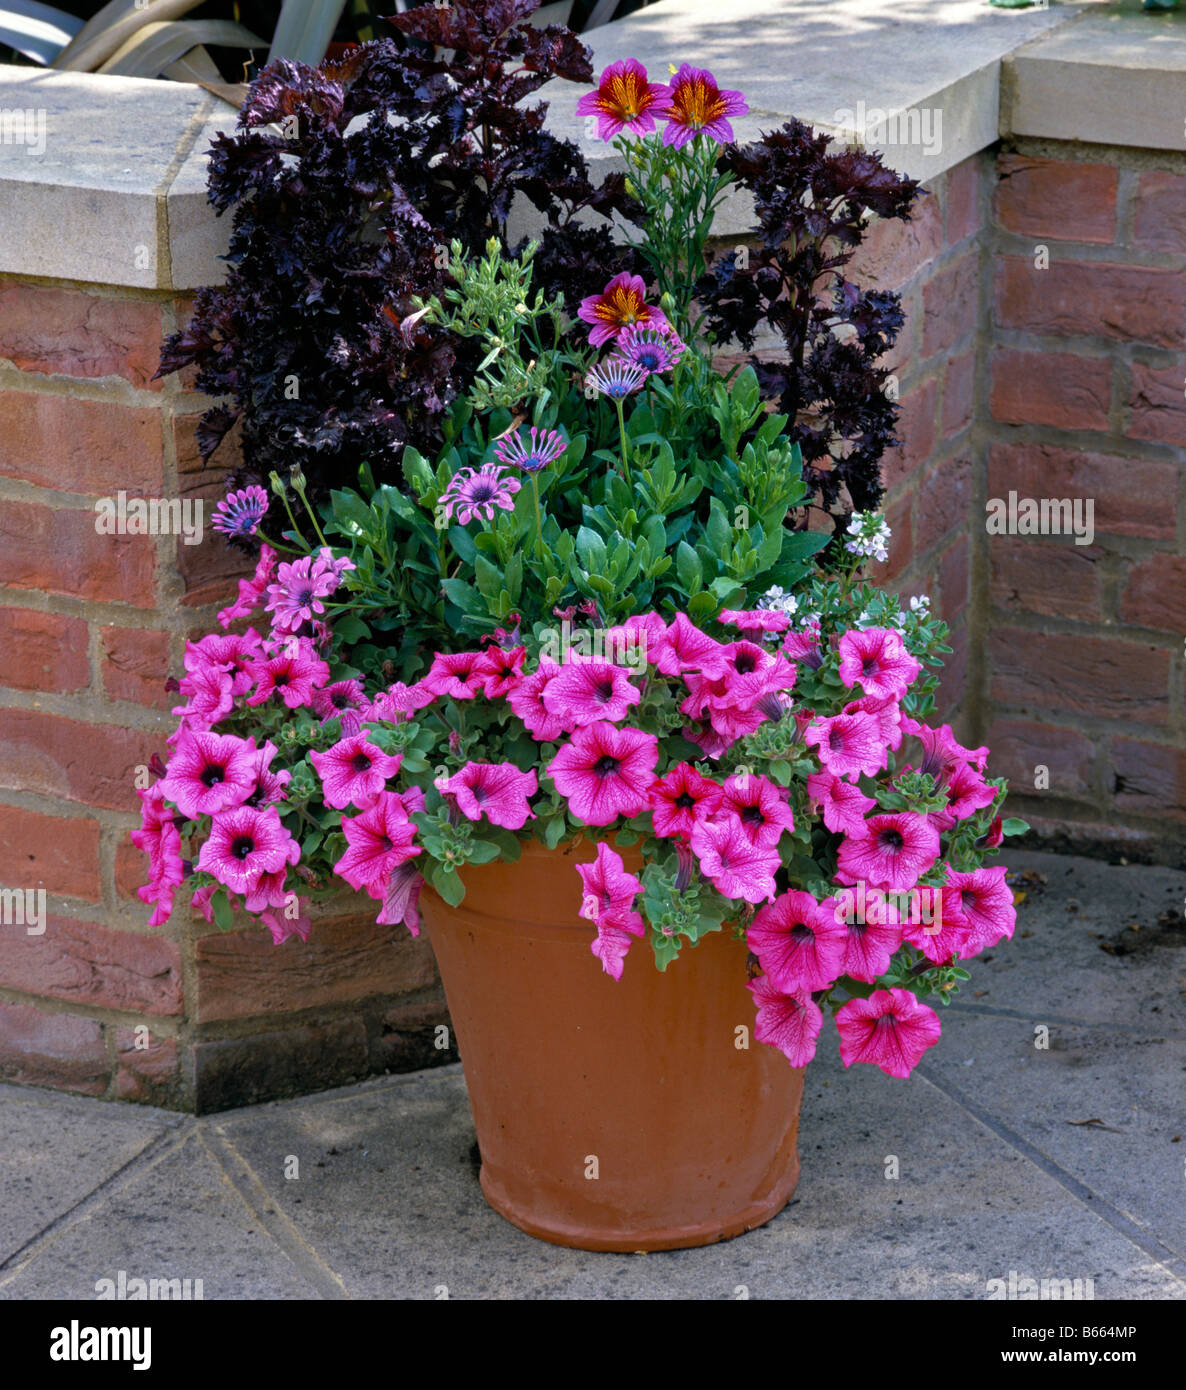 Patio container with miixed summer planting Stock Photo